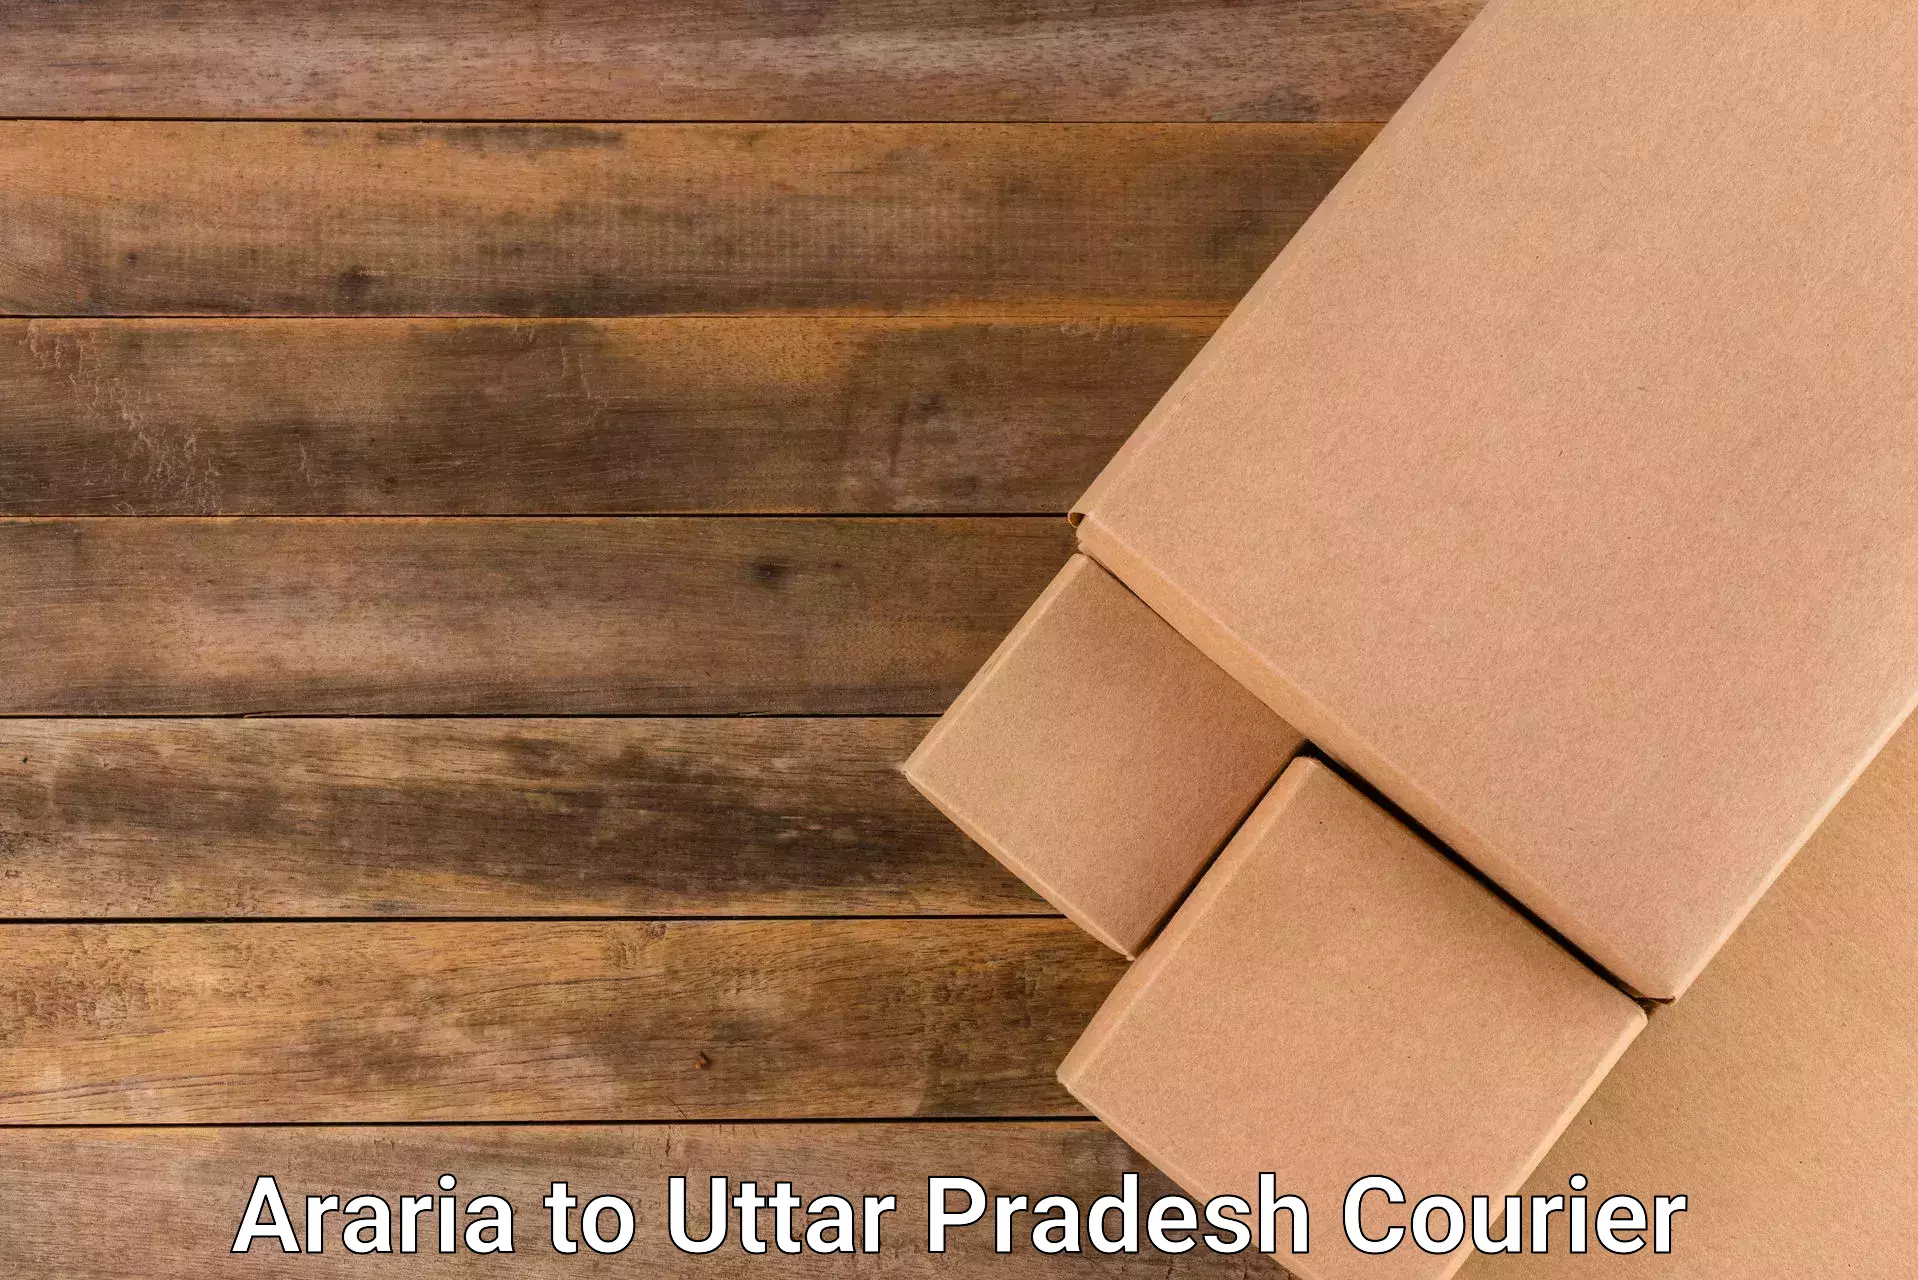 High-speed parcel service Araria to Aligarh